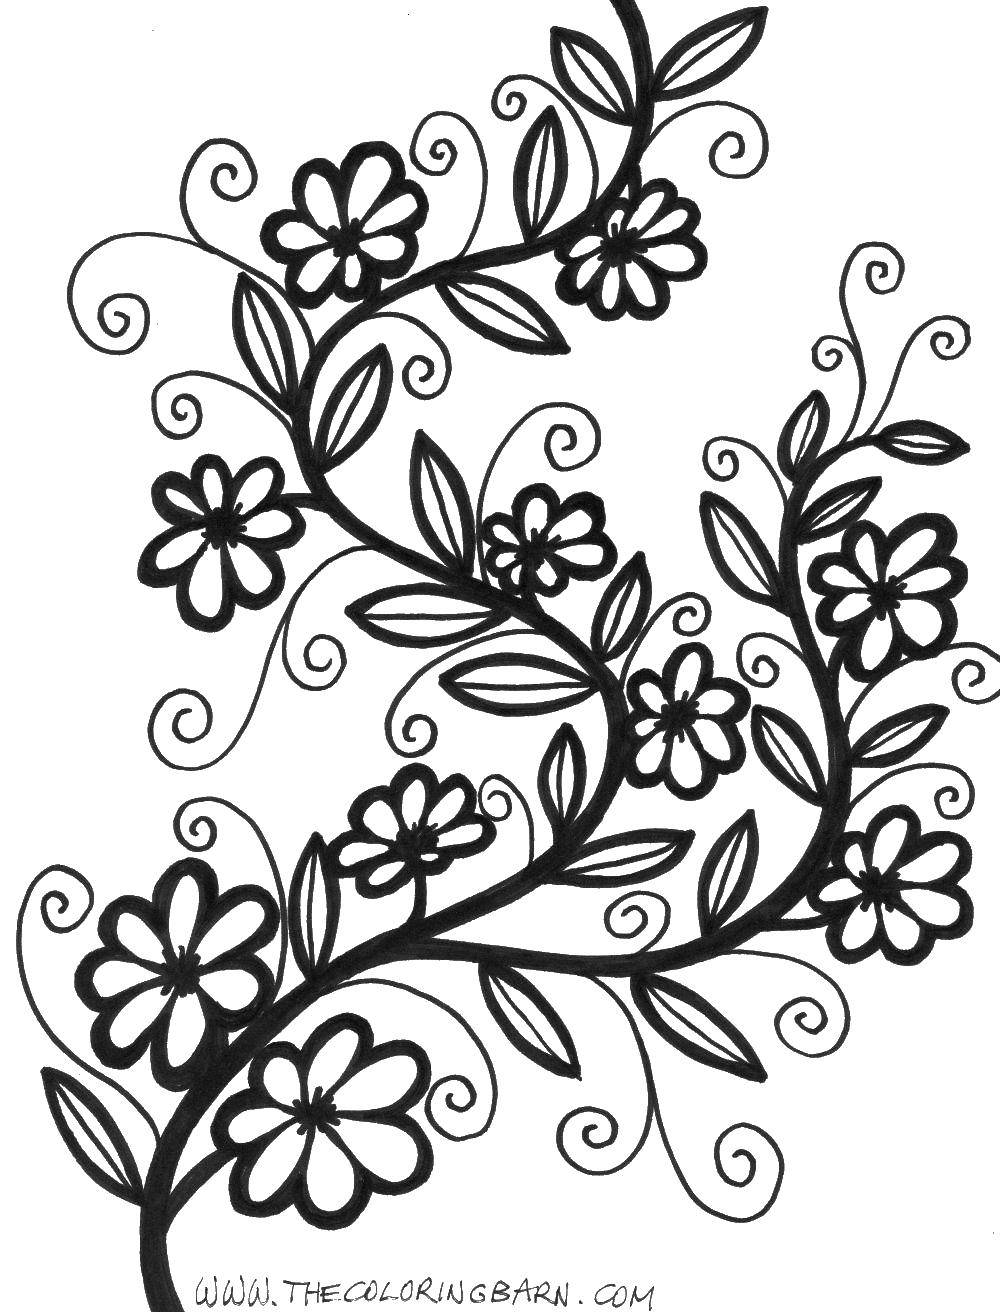 Coloring Patterns. Category patterns. Tags:  patterns, flowers.